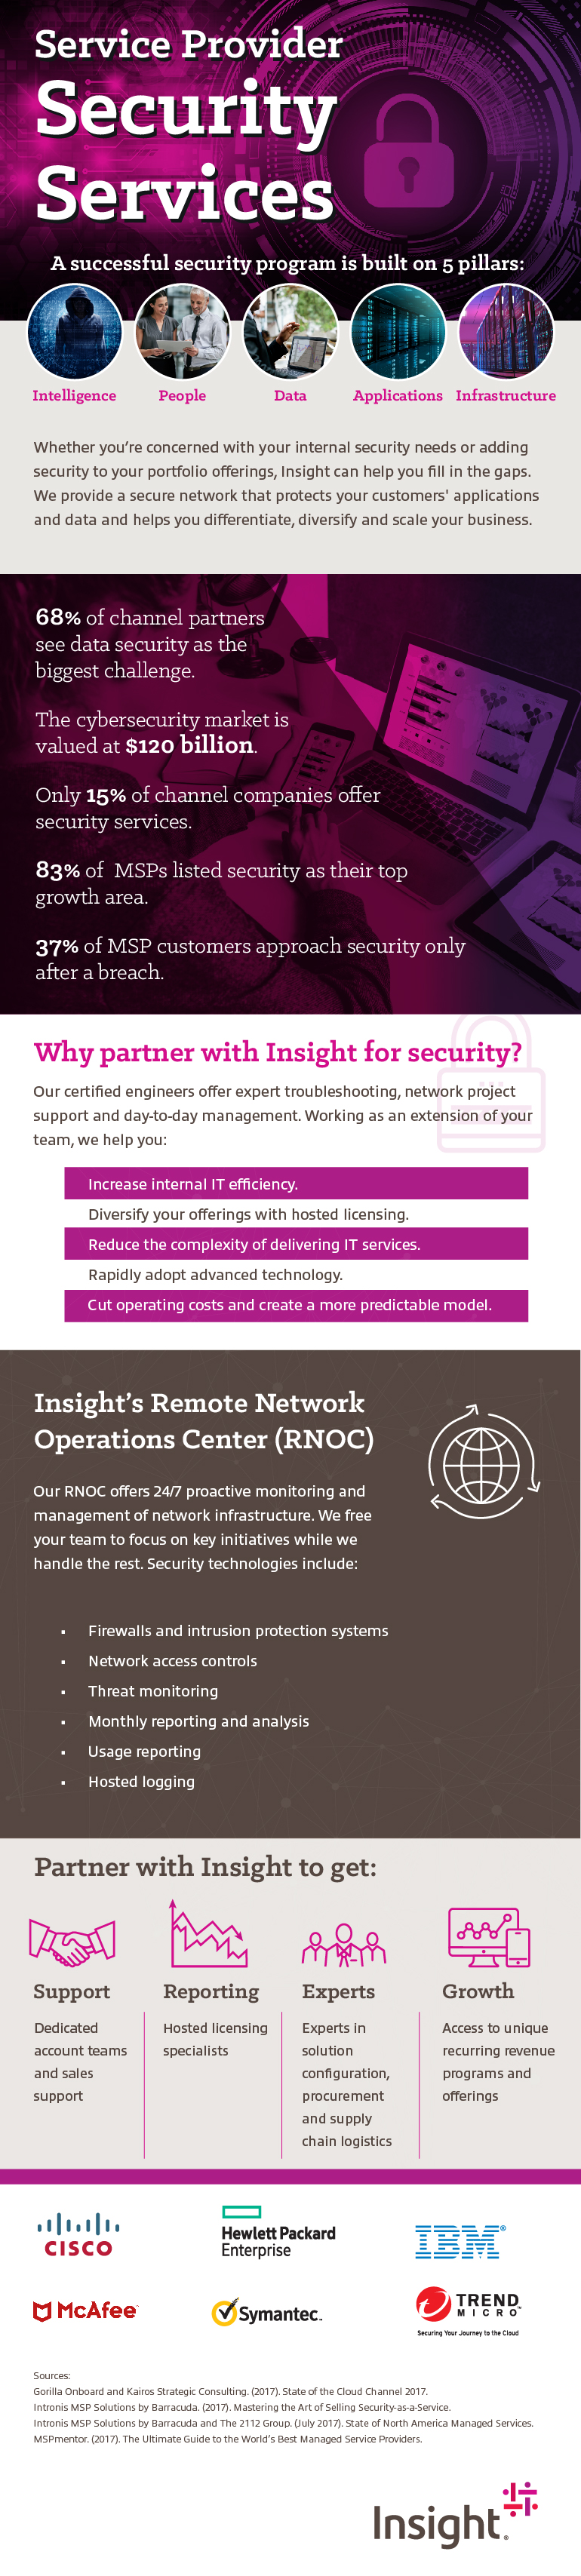 Service Provider Security Playbook Infographic